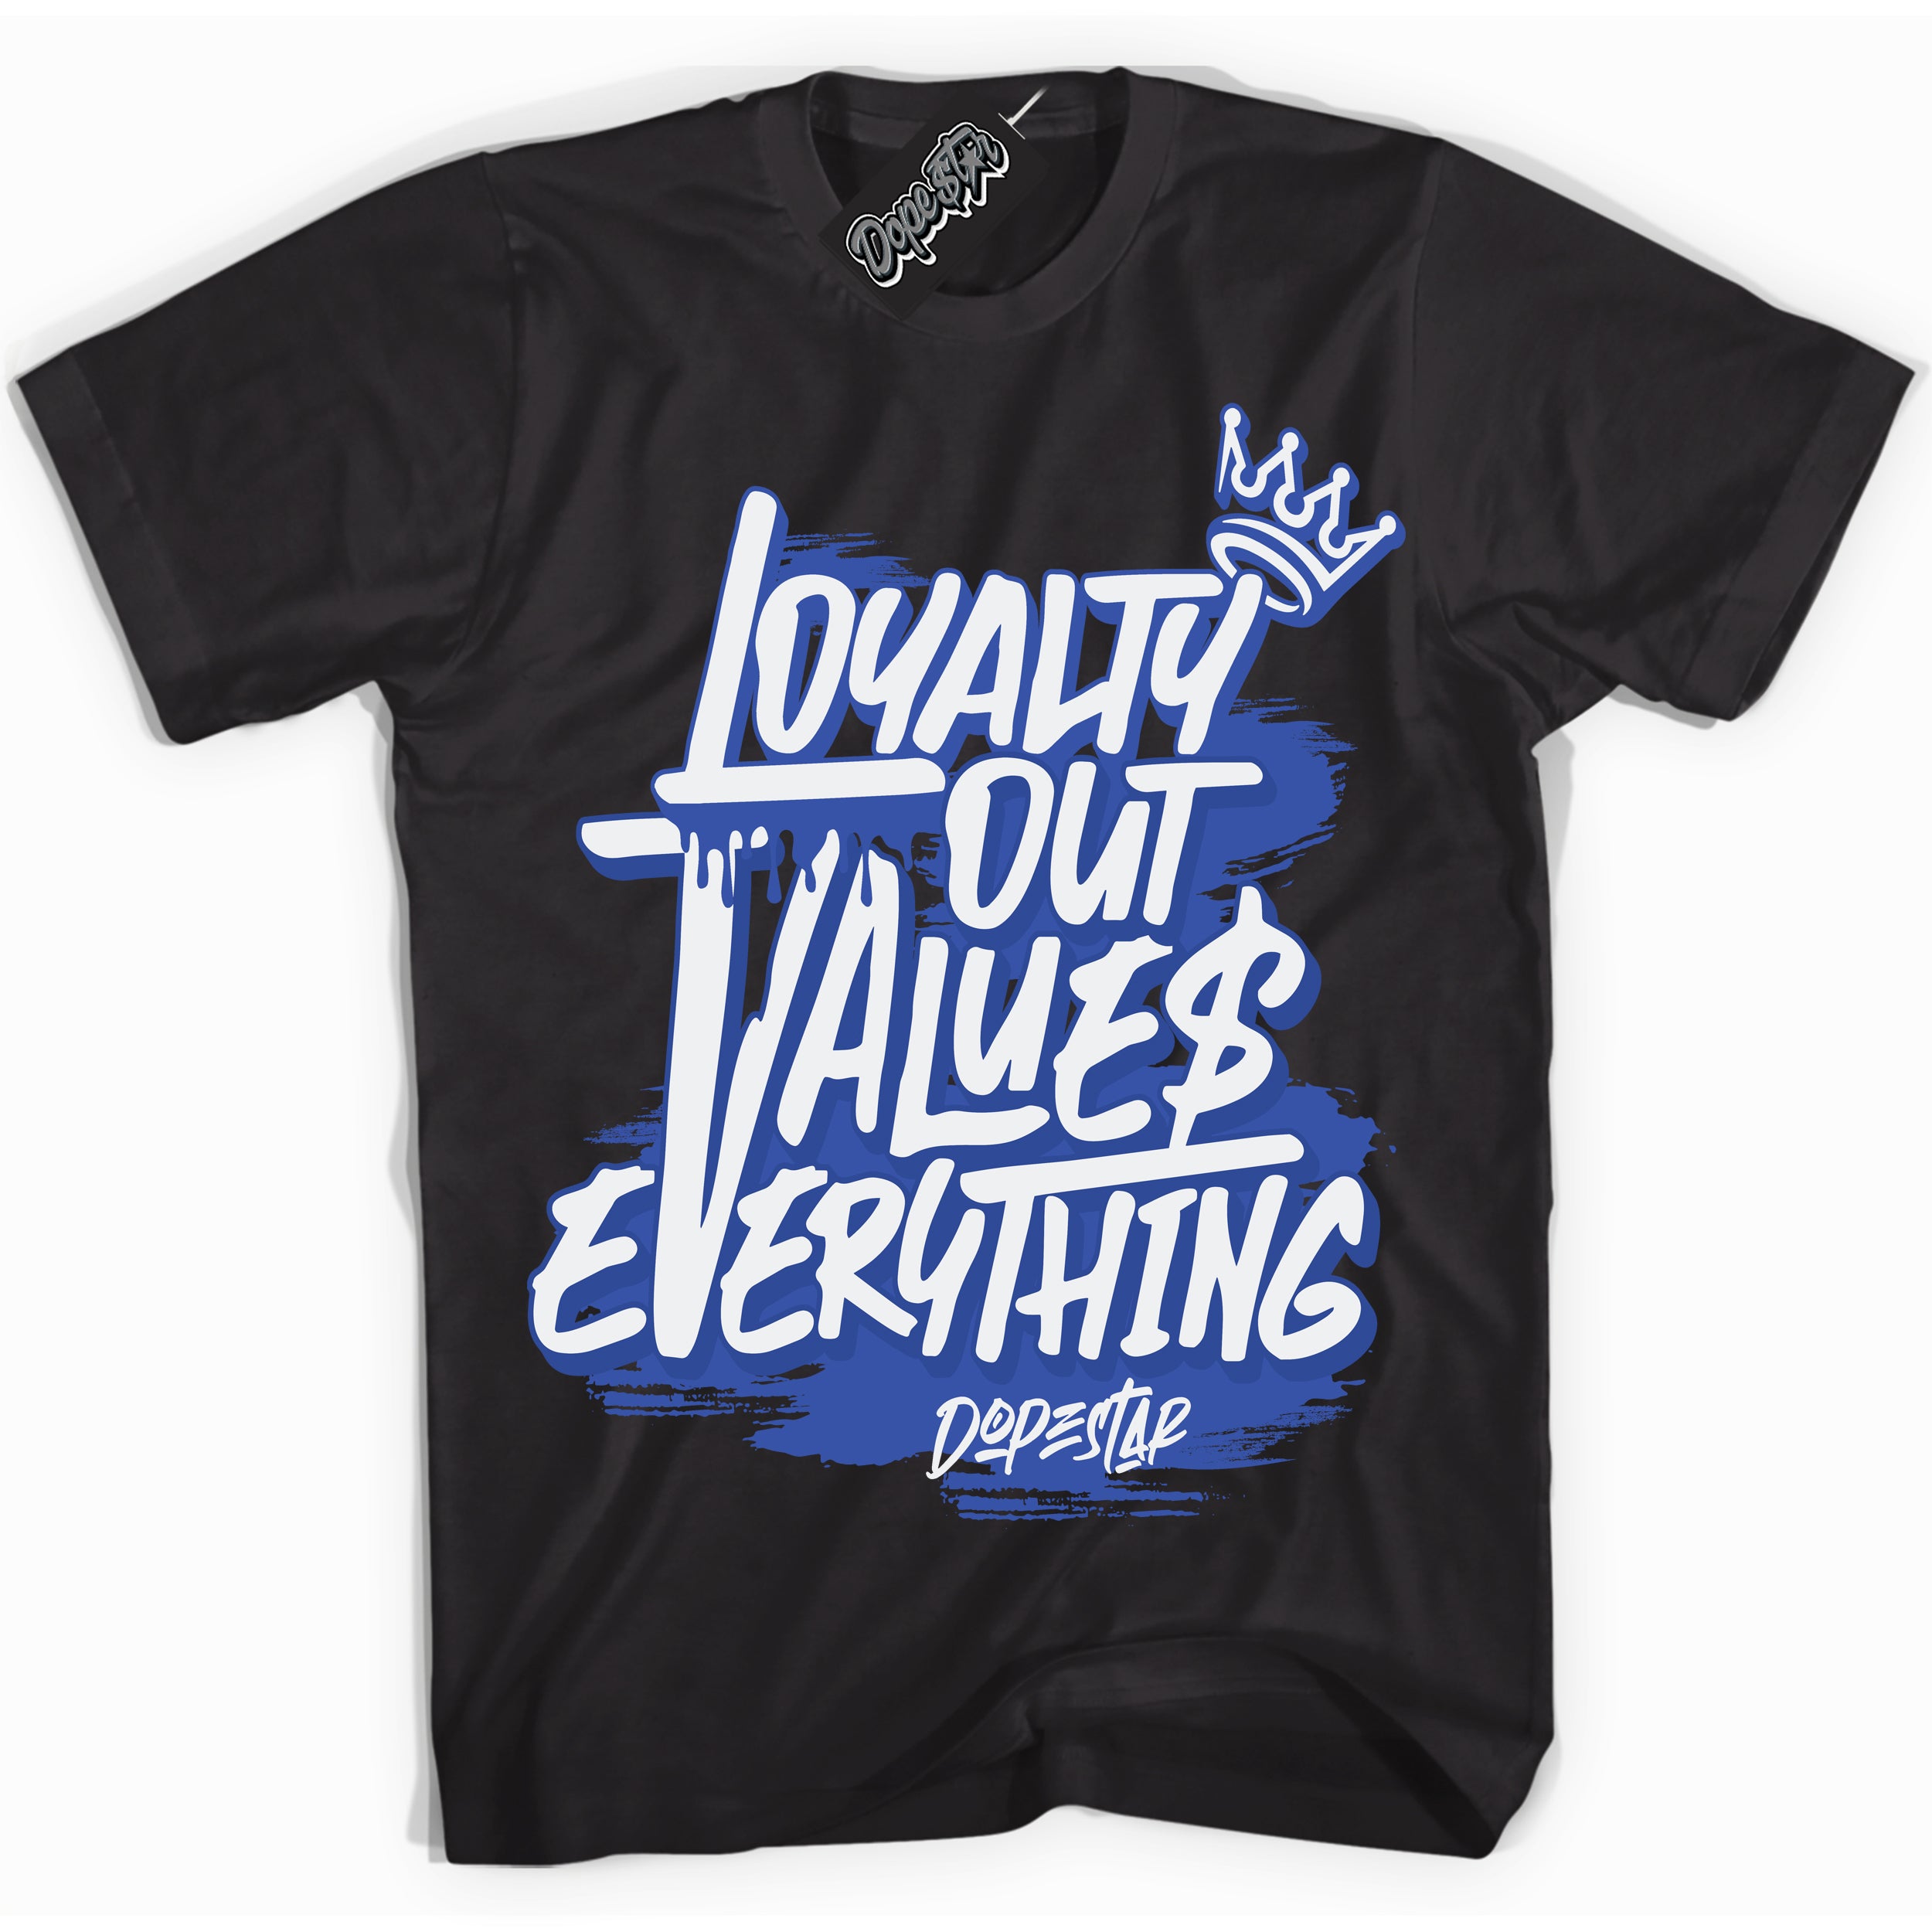 Cool Black Shirt with “ Loyalty Out Values Everything” design that perfectly matches Racer Blue Photon Dust Sneakers.